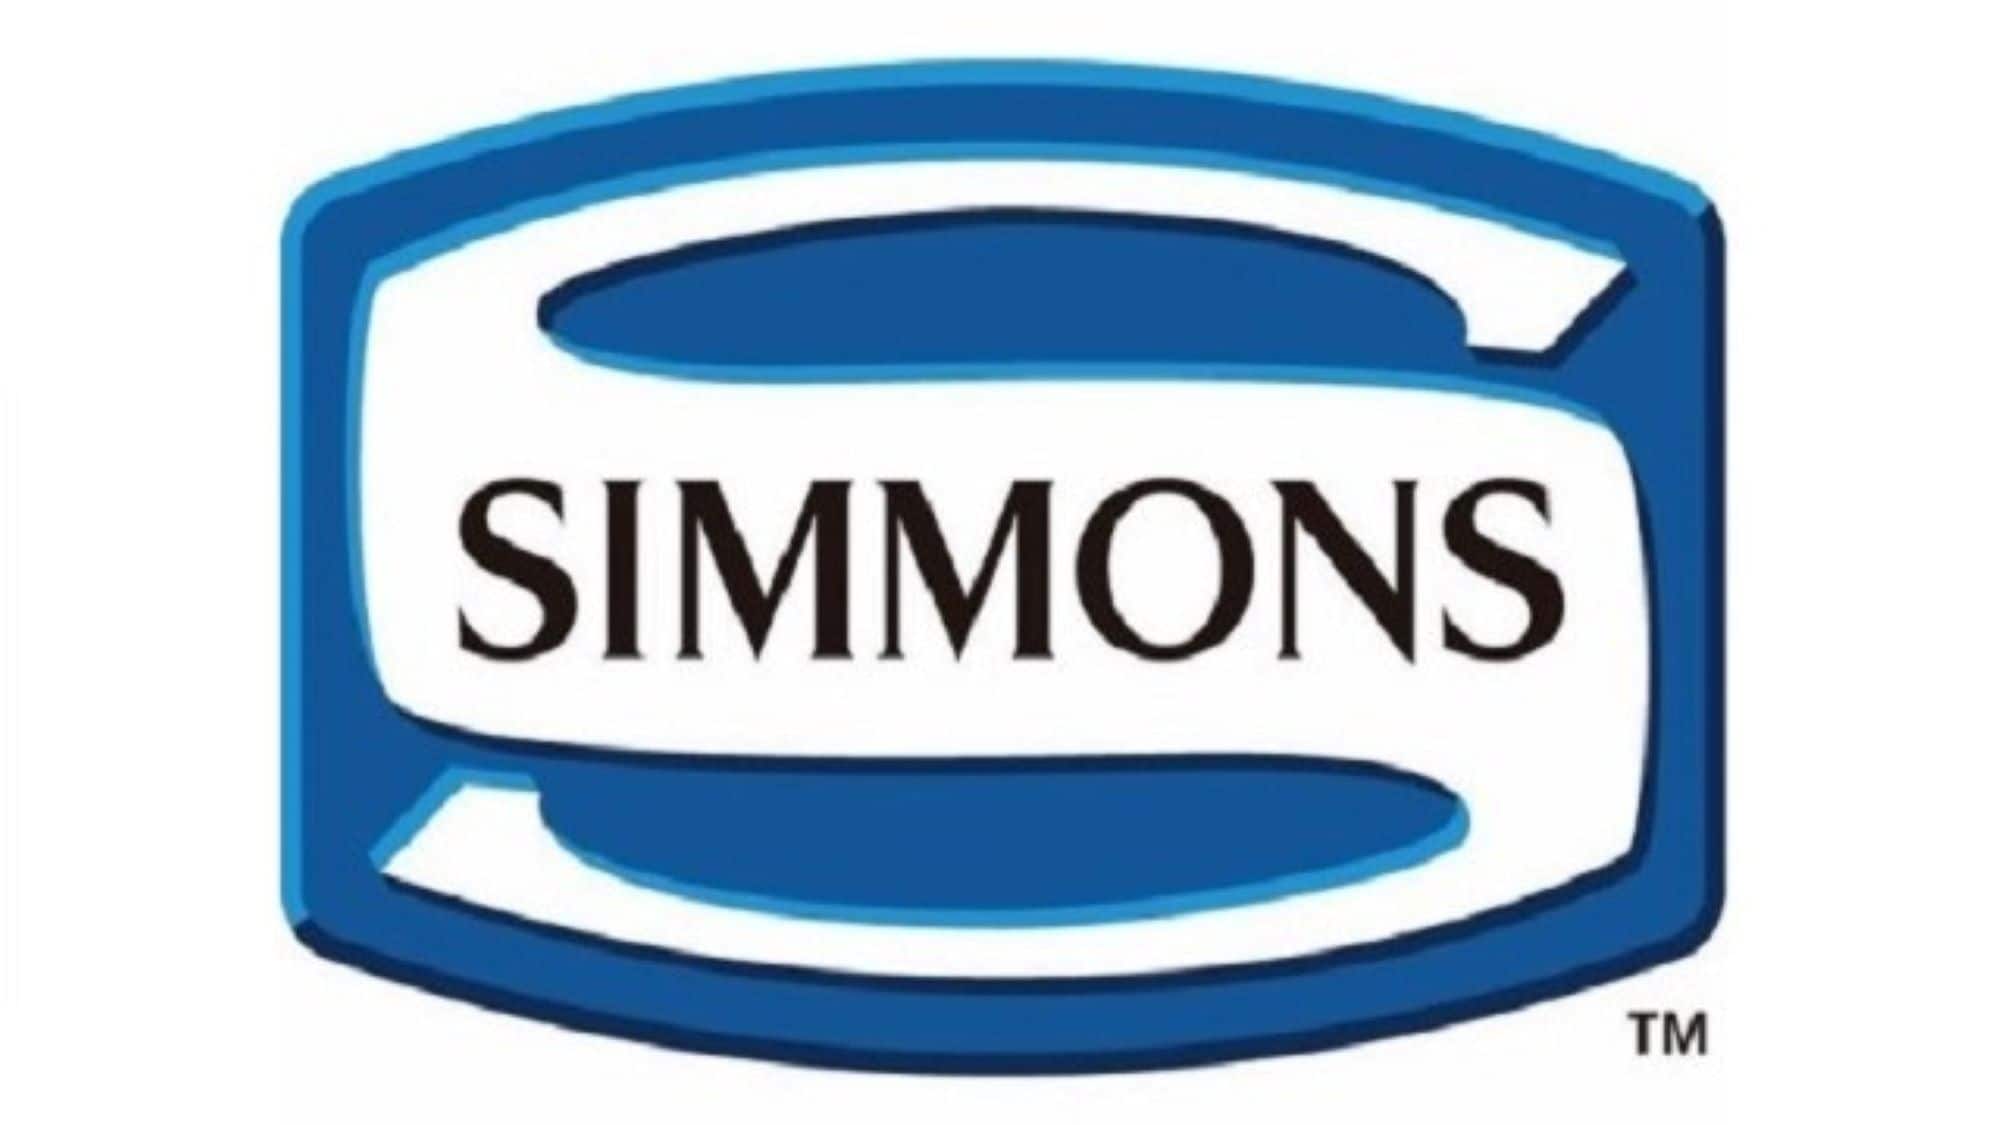 Simmons bed